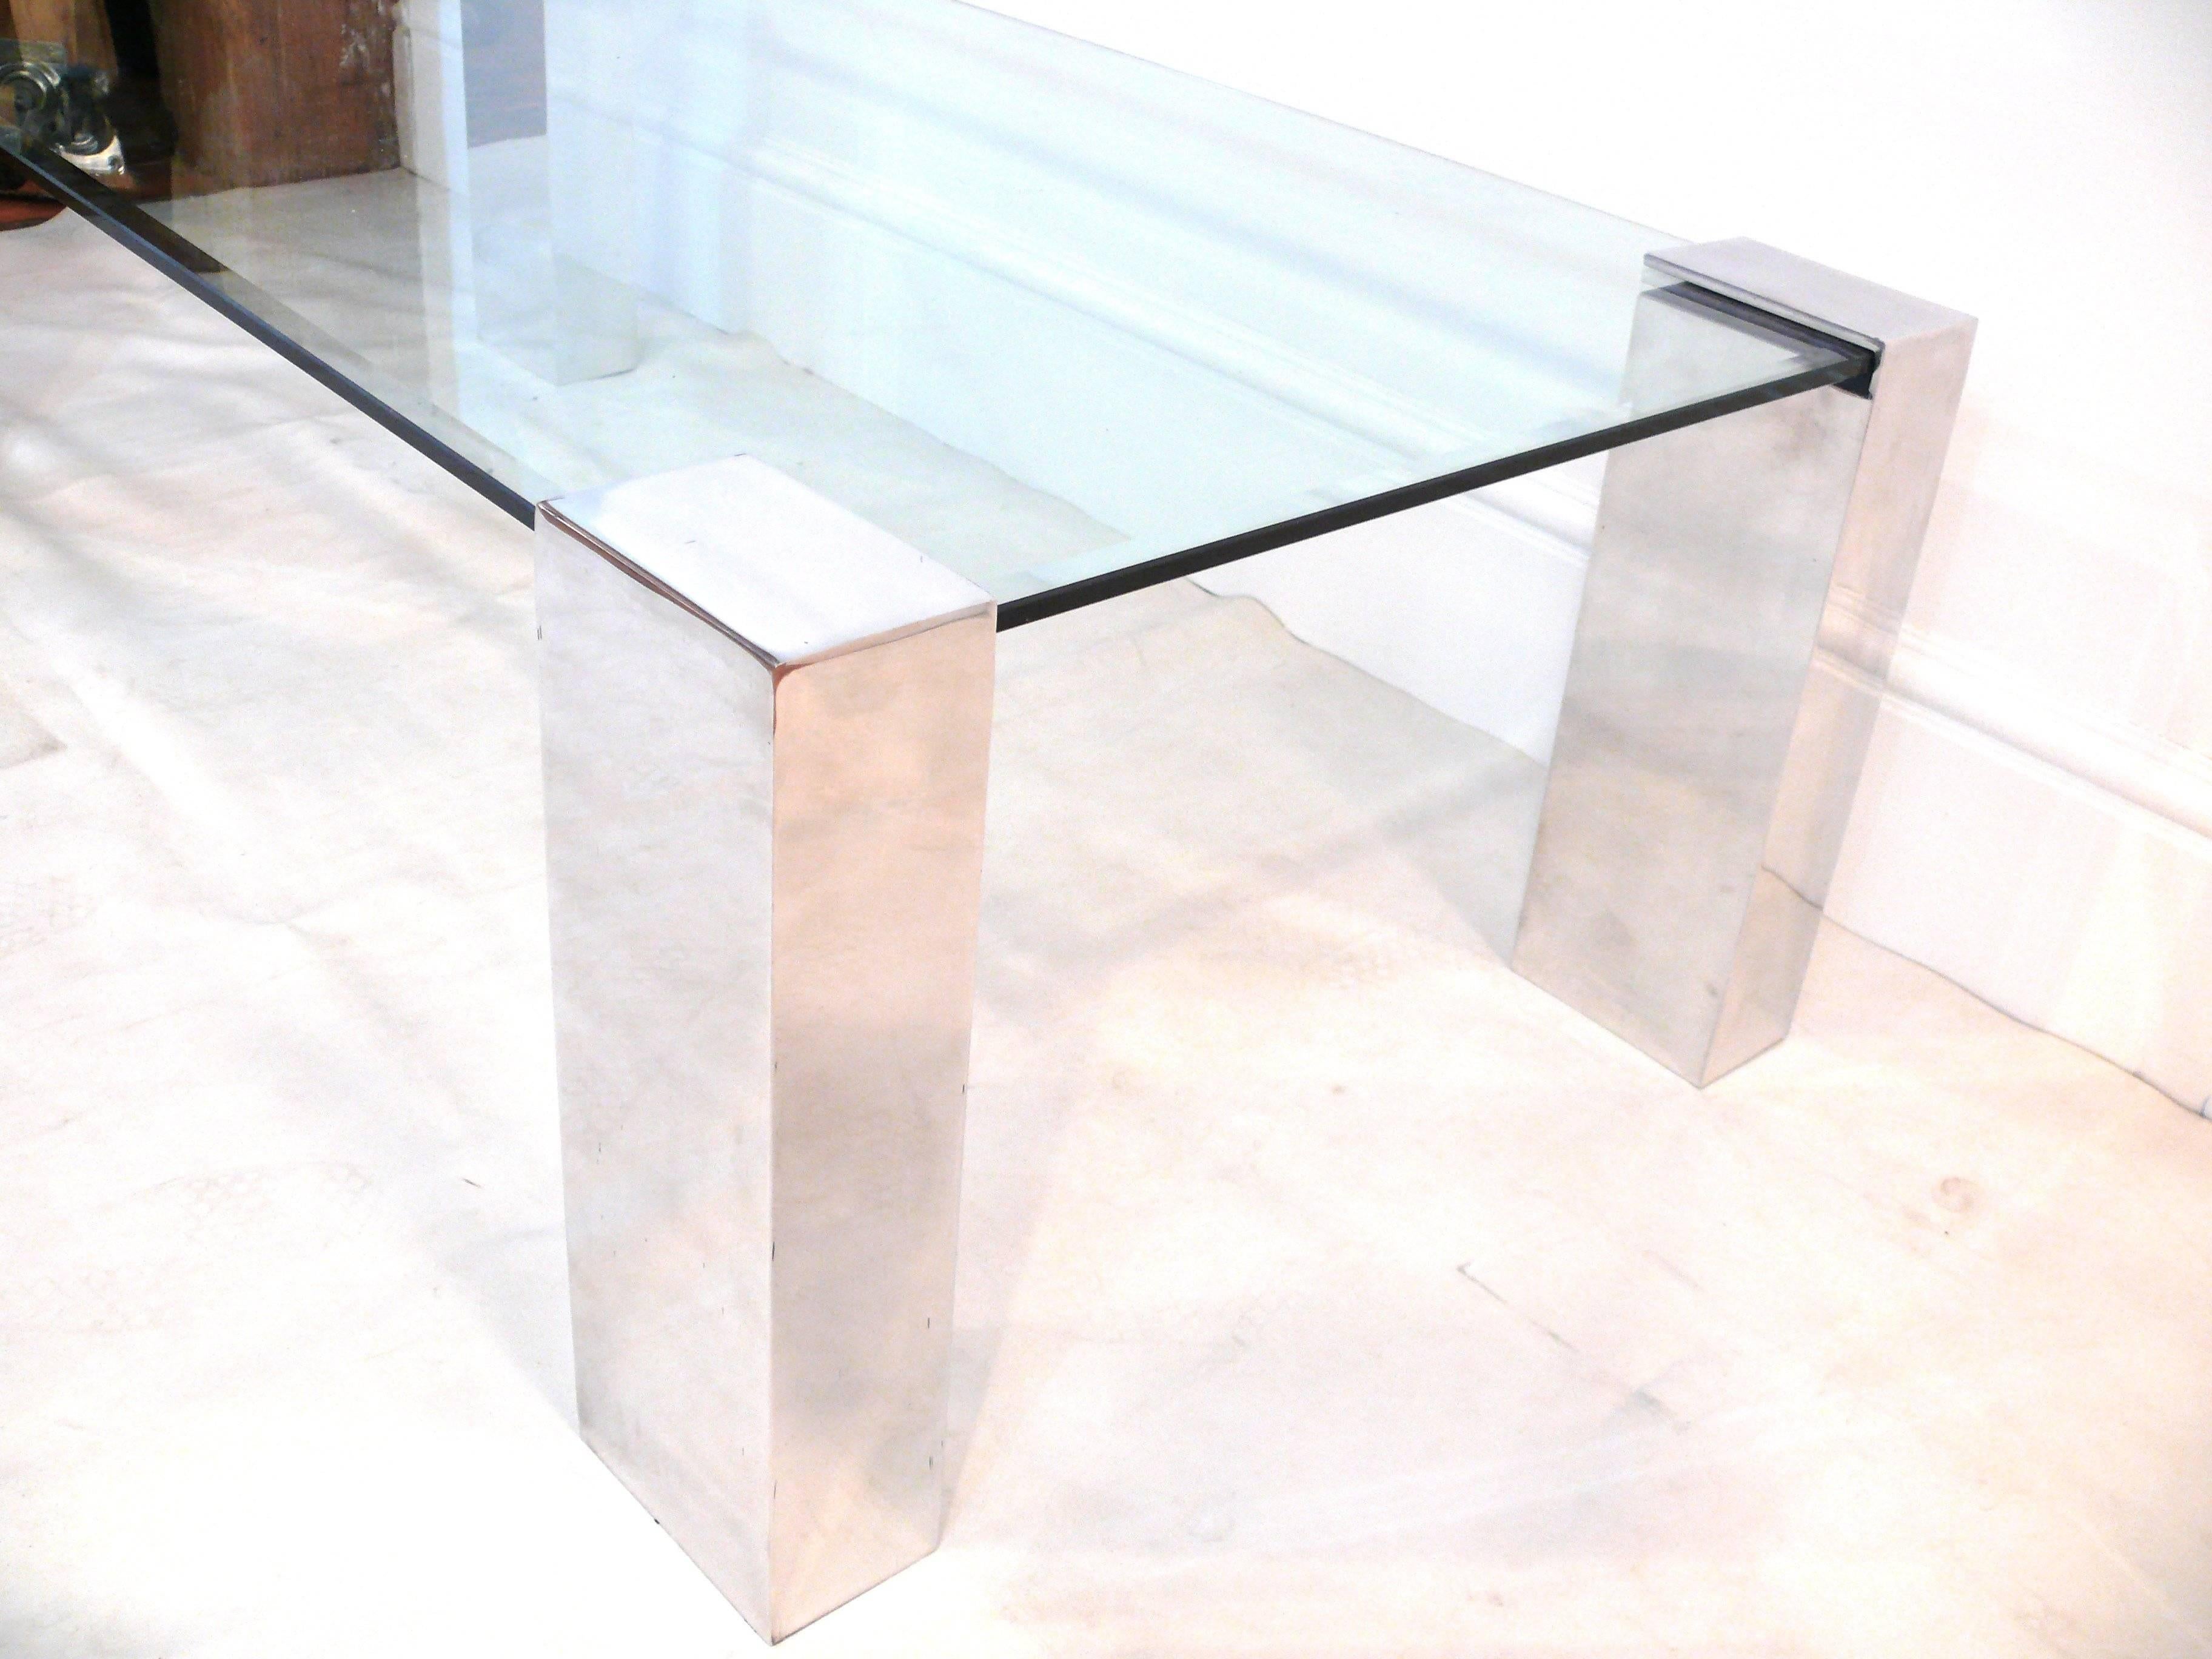 Pace style coffee table with chunky polished aluminum rectangular shaped legs and new inset glass top. Will support many different size glass tops. Legs are each 3